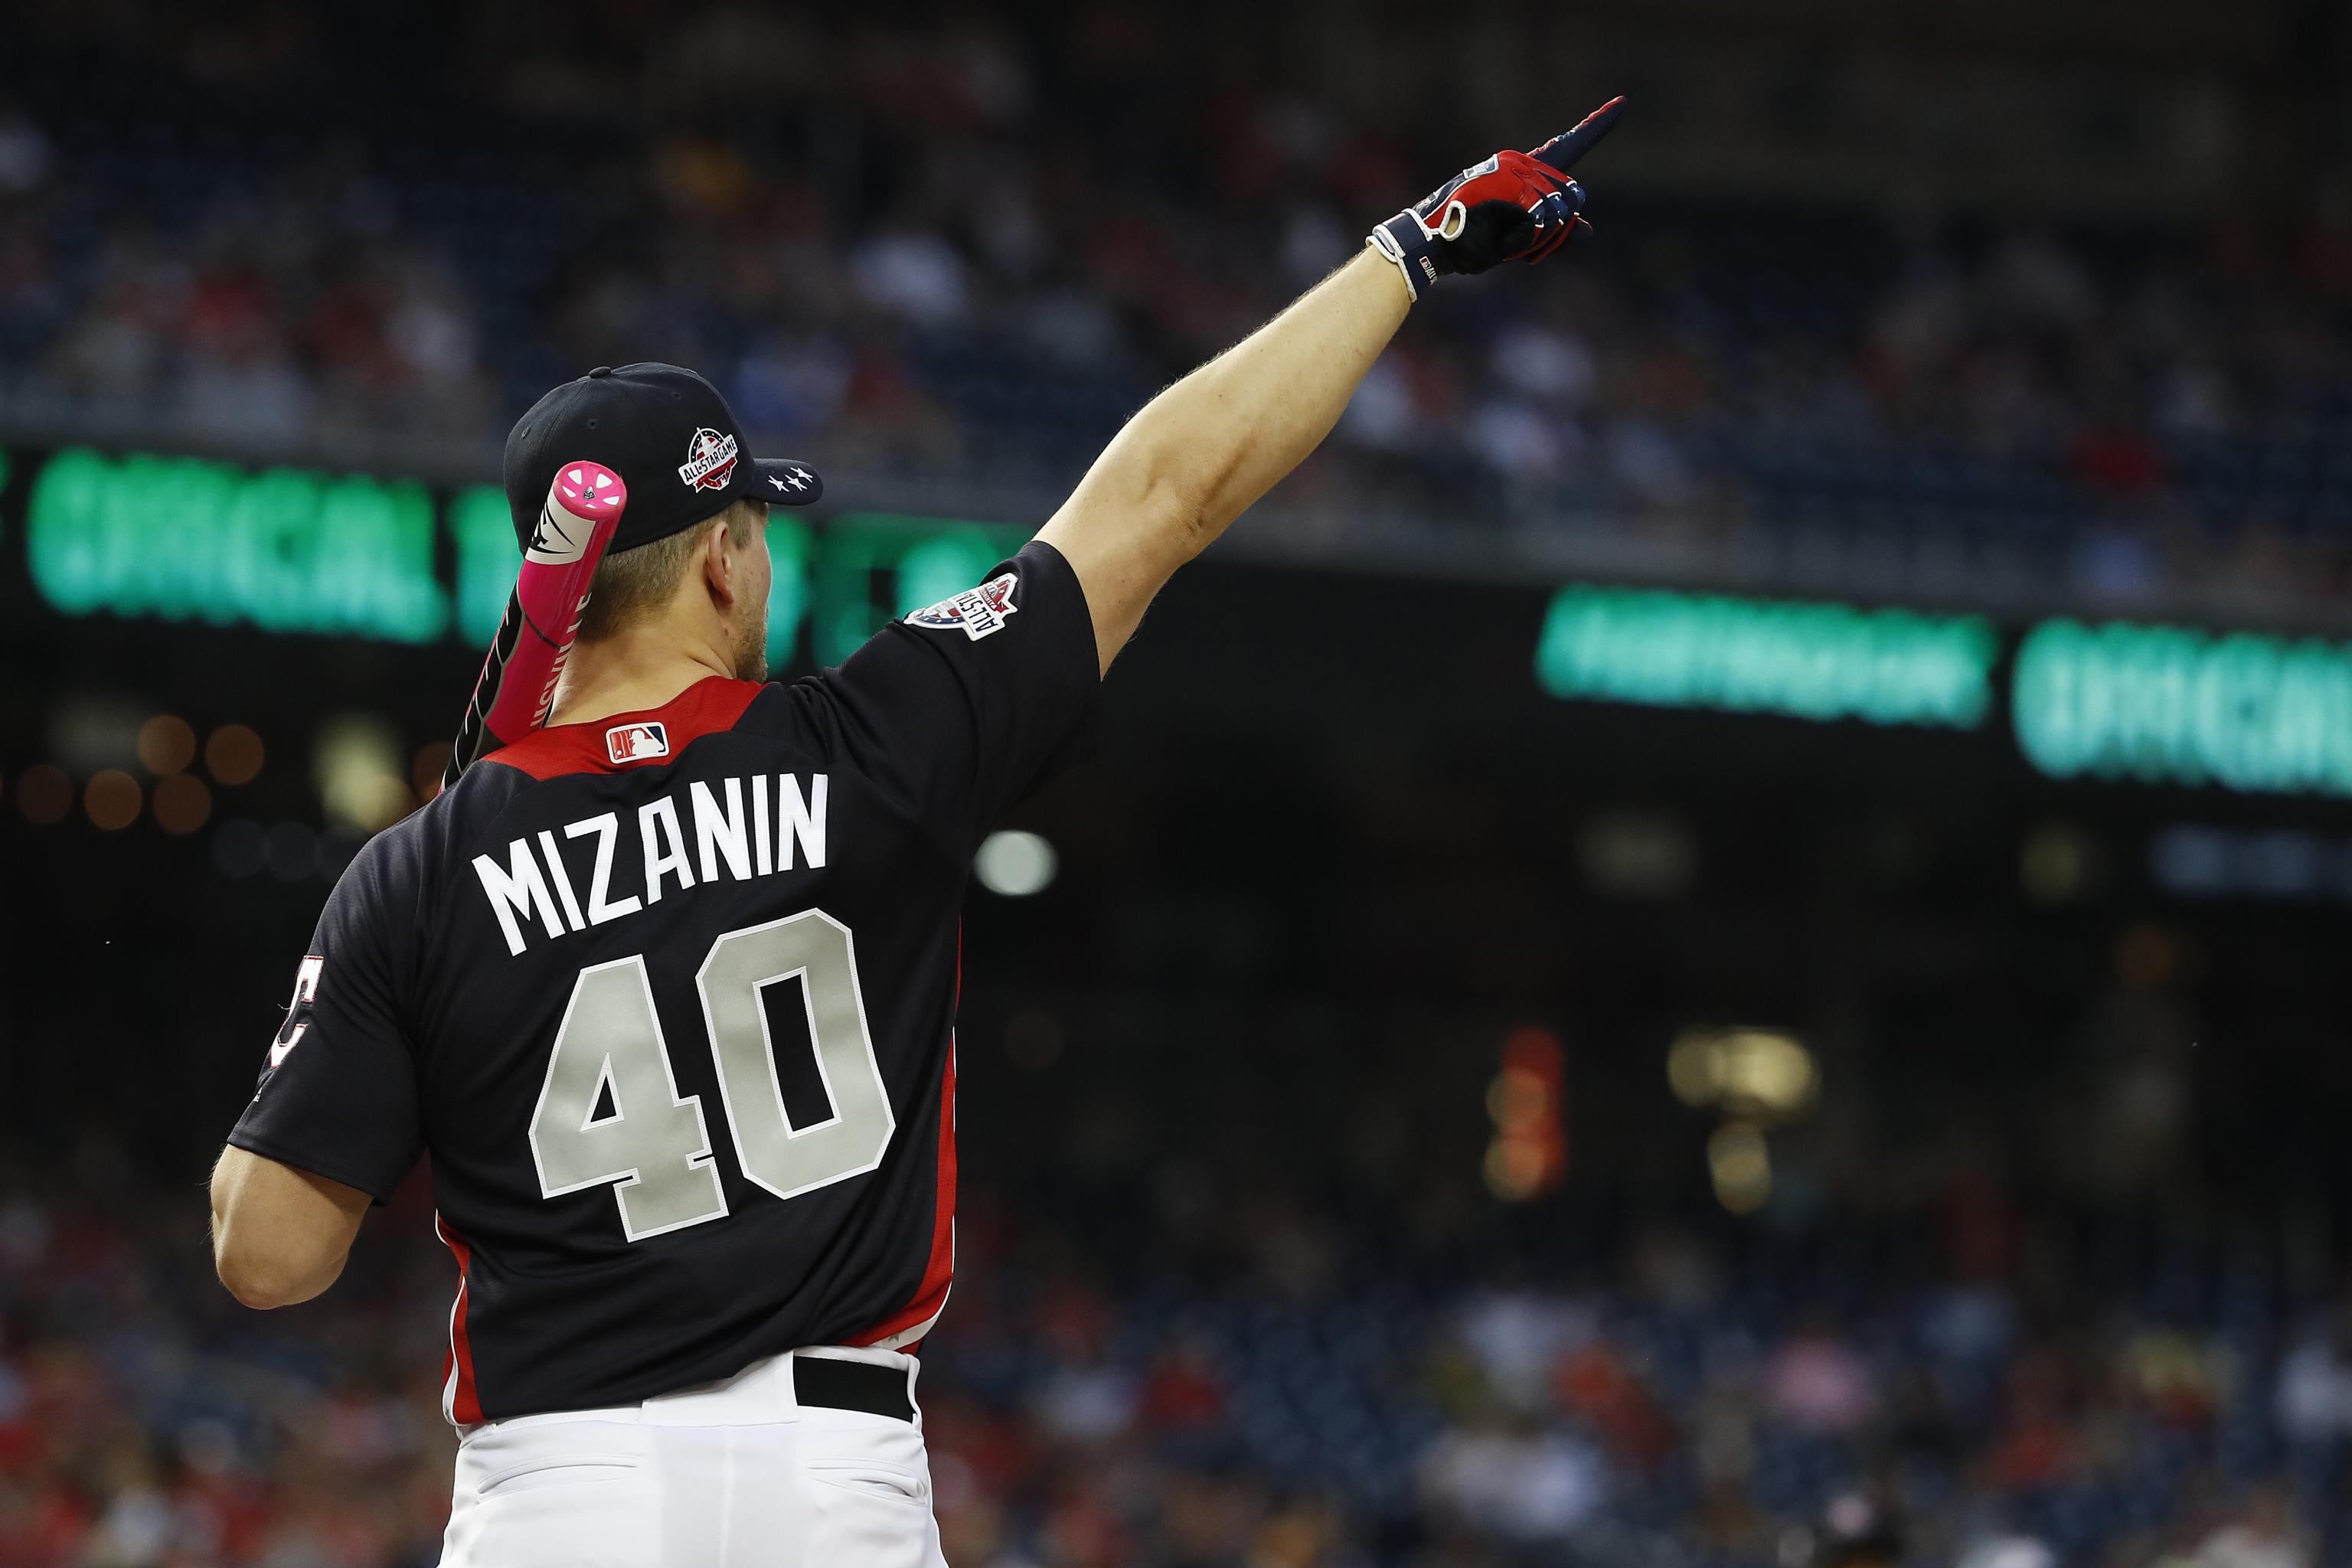 MLB Celebrity Softball Game 2019: Final Rosters, TV Schedule and